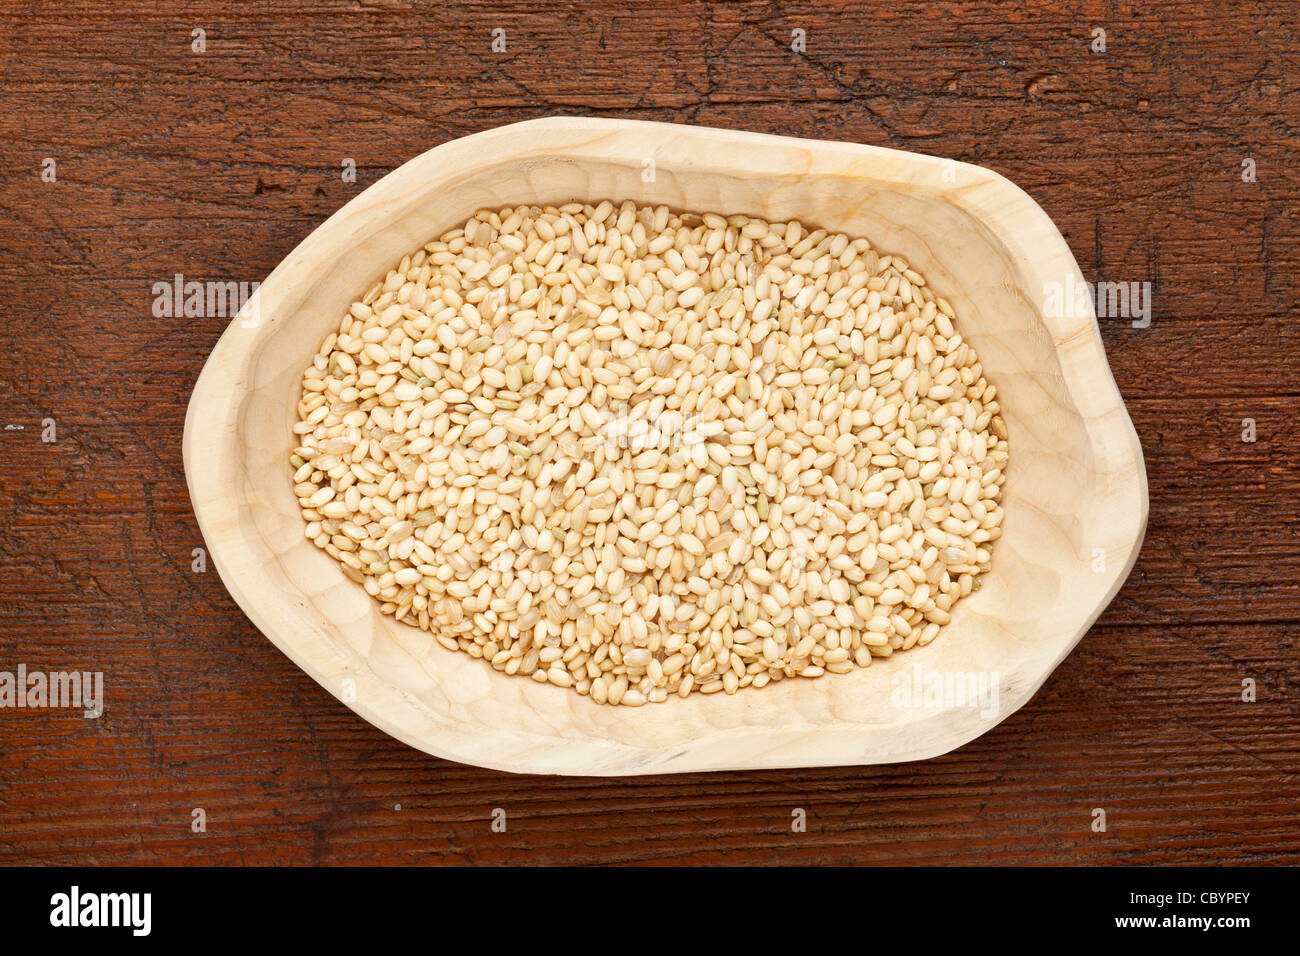 sweet brown rice grain in a rustic wood bowl against grunge dark wooden table surface, top view Stock Photo